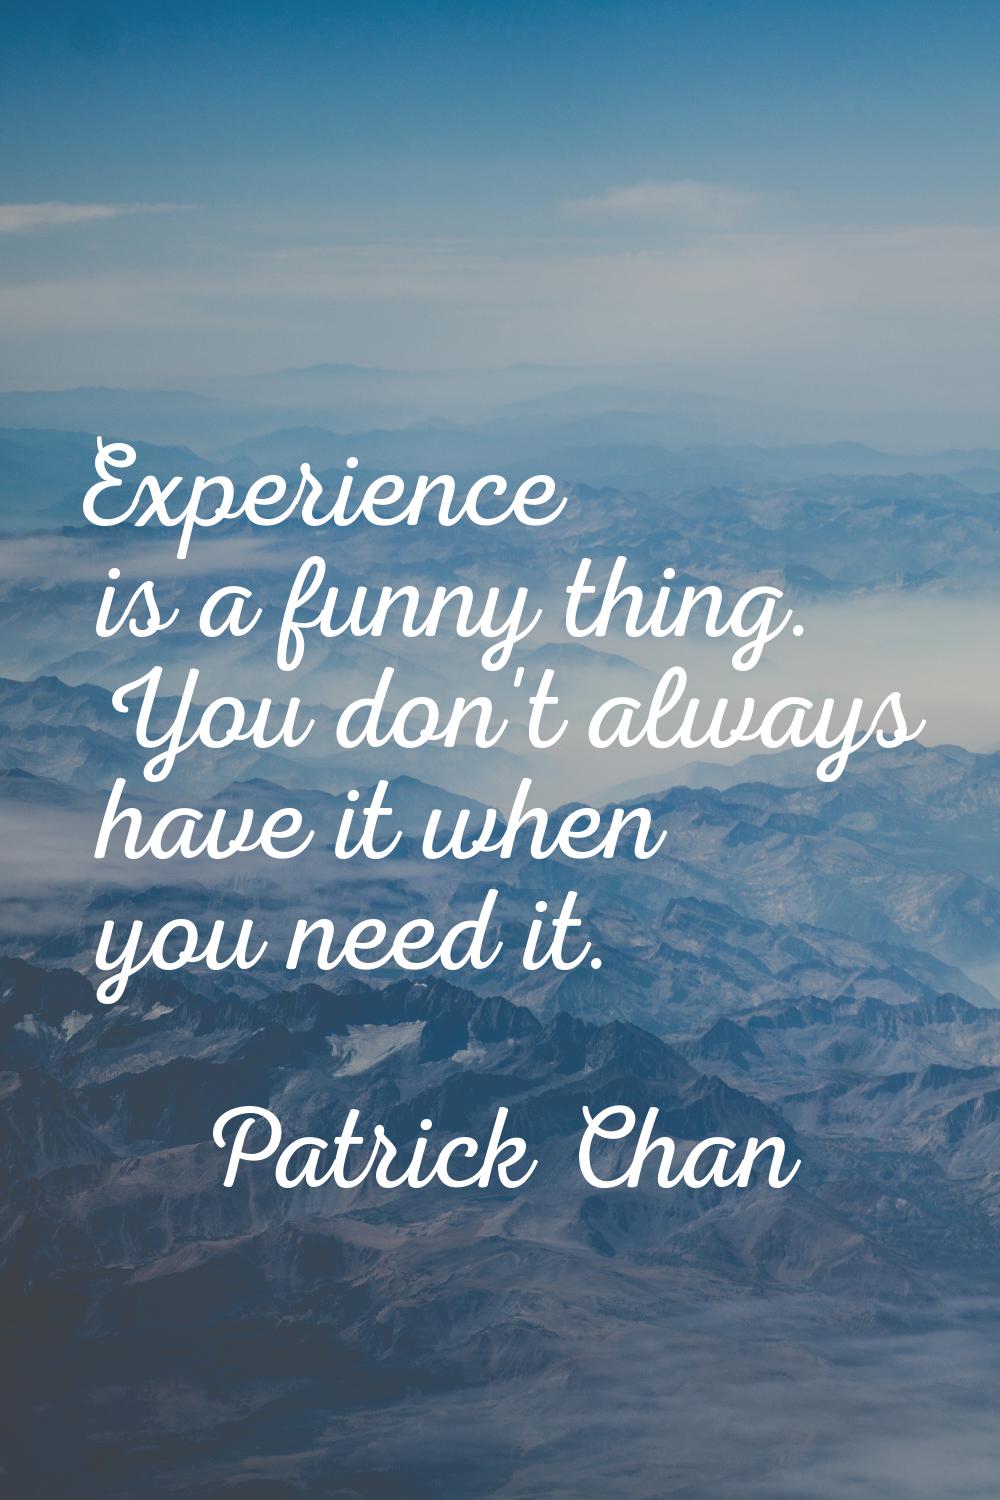 Experience is a funny thing. You don't always have it when you need it.